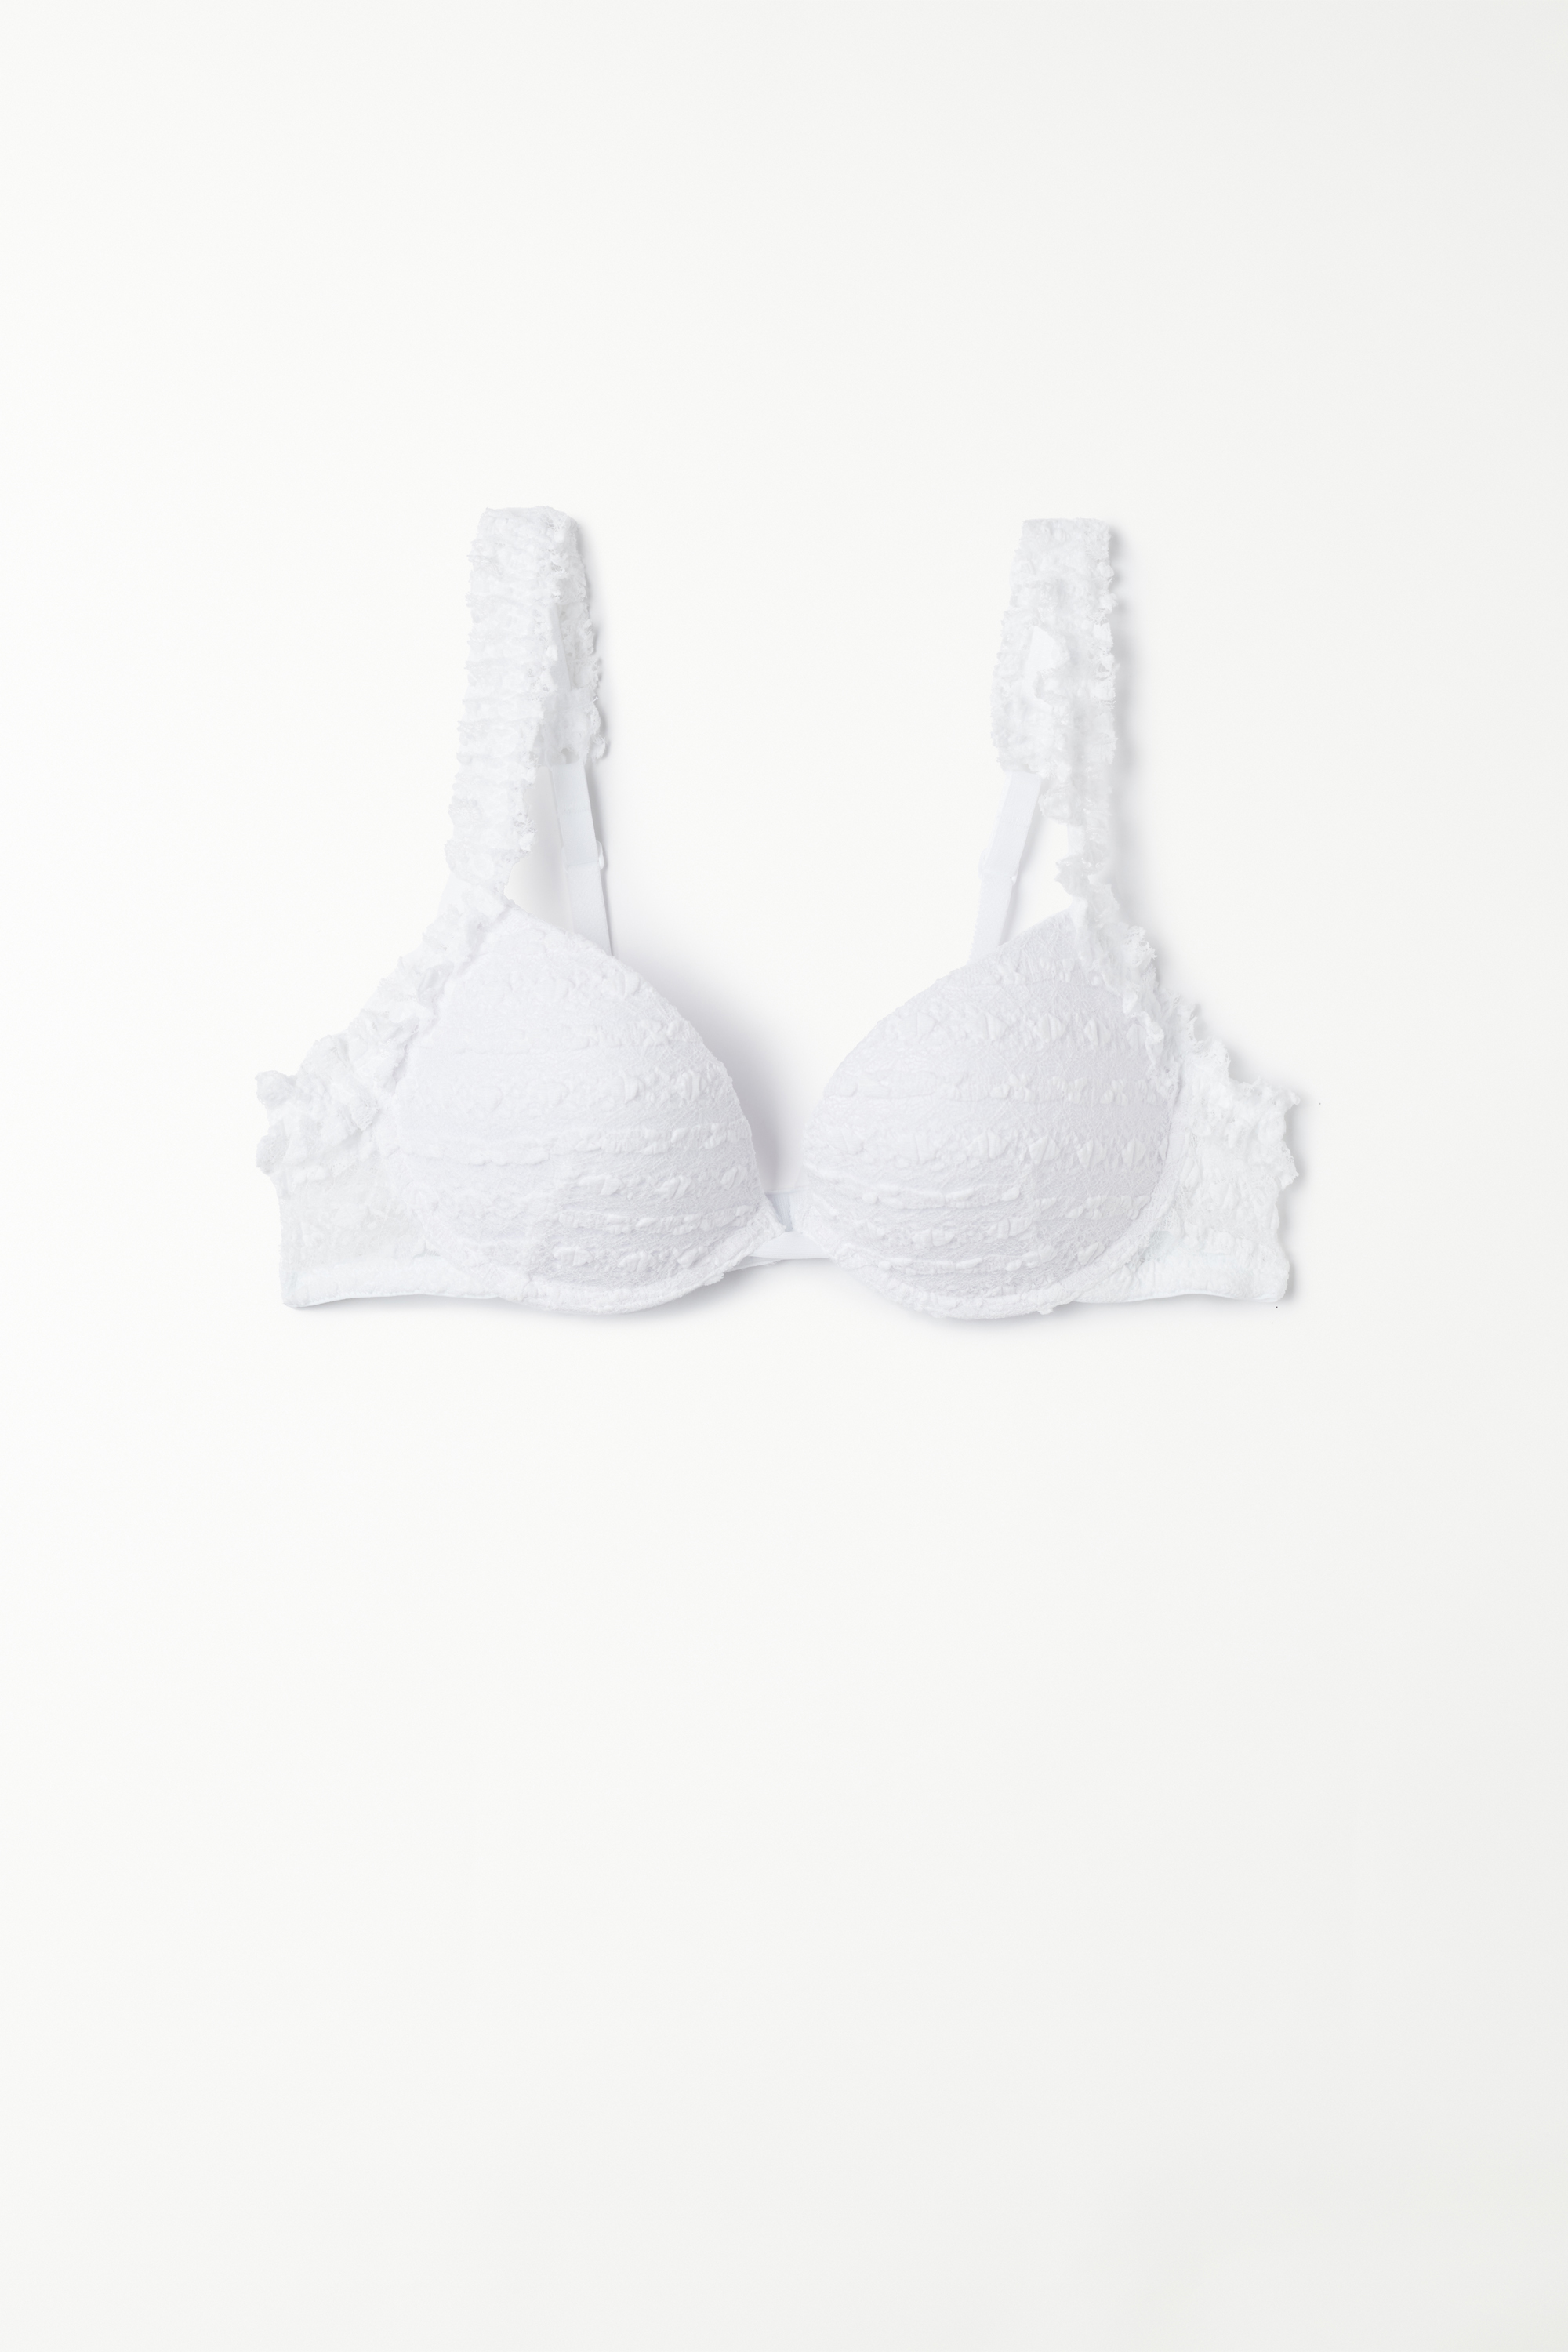 Moscow Country Bride Push-Up Bra